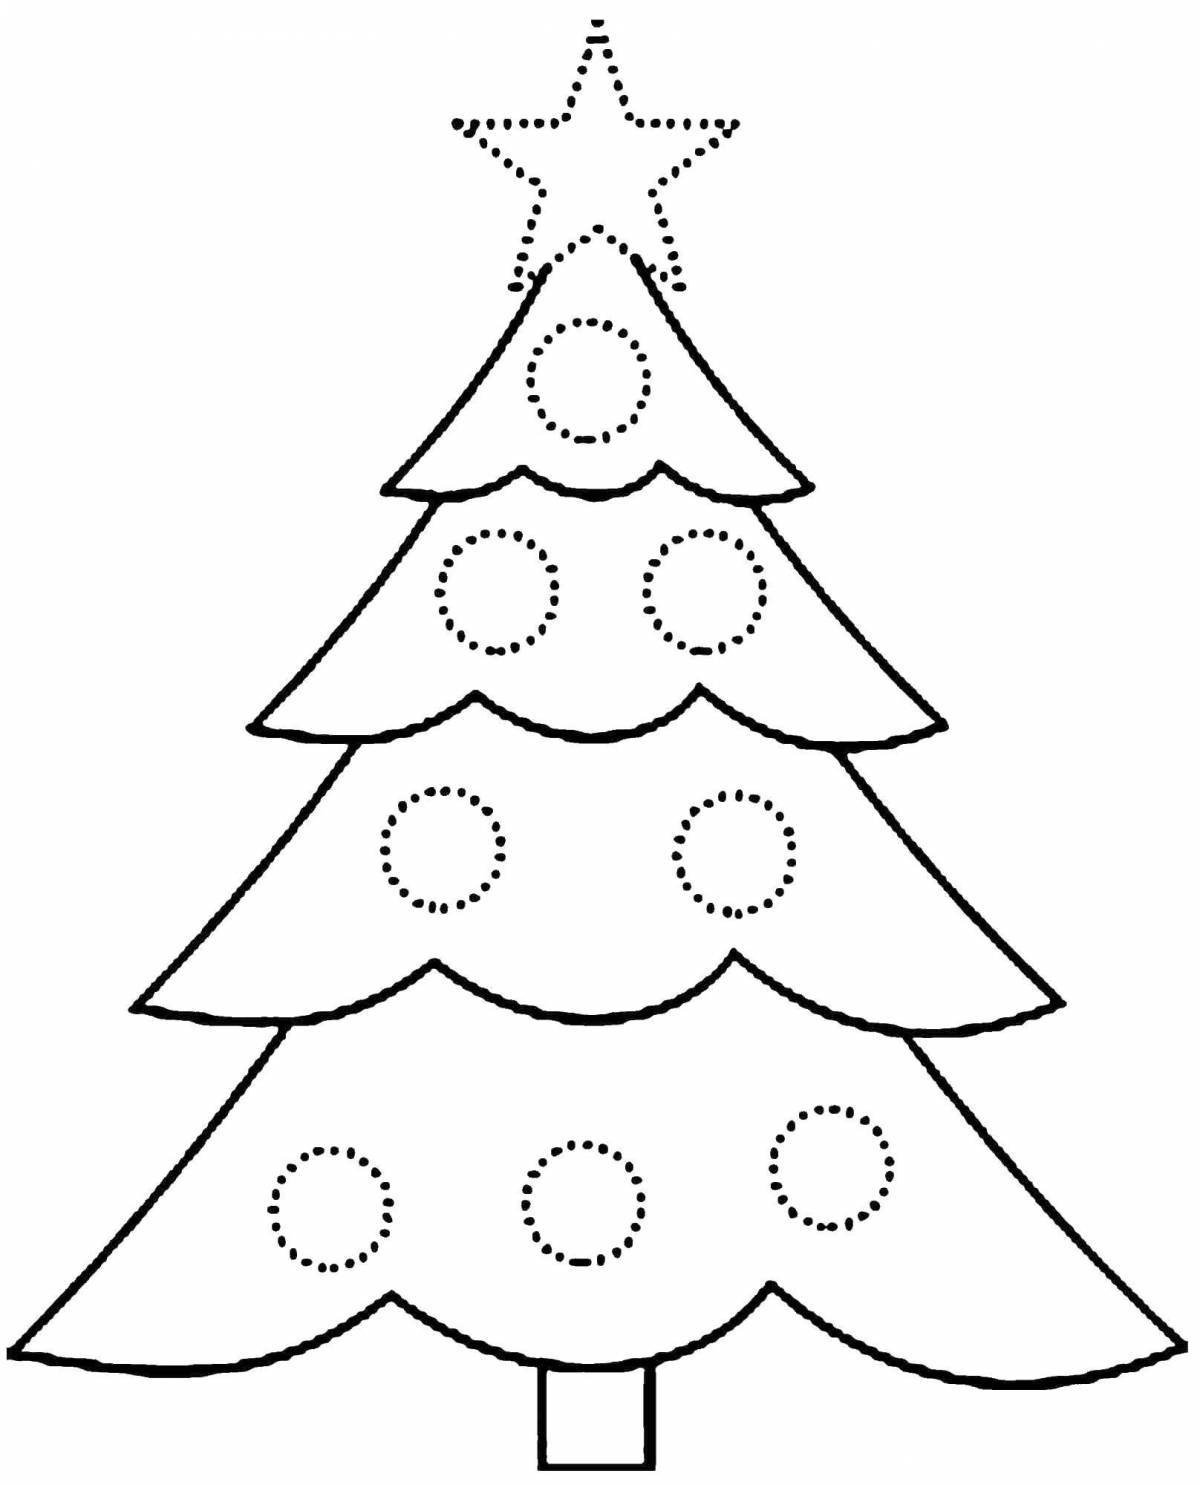 Amazing Christmas tree coloring page